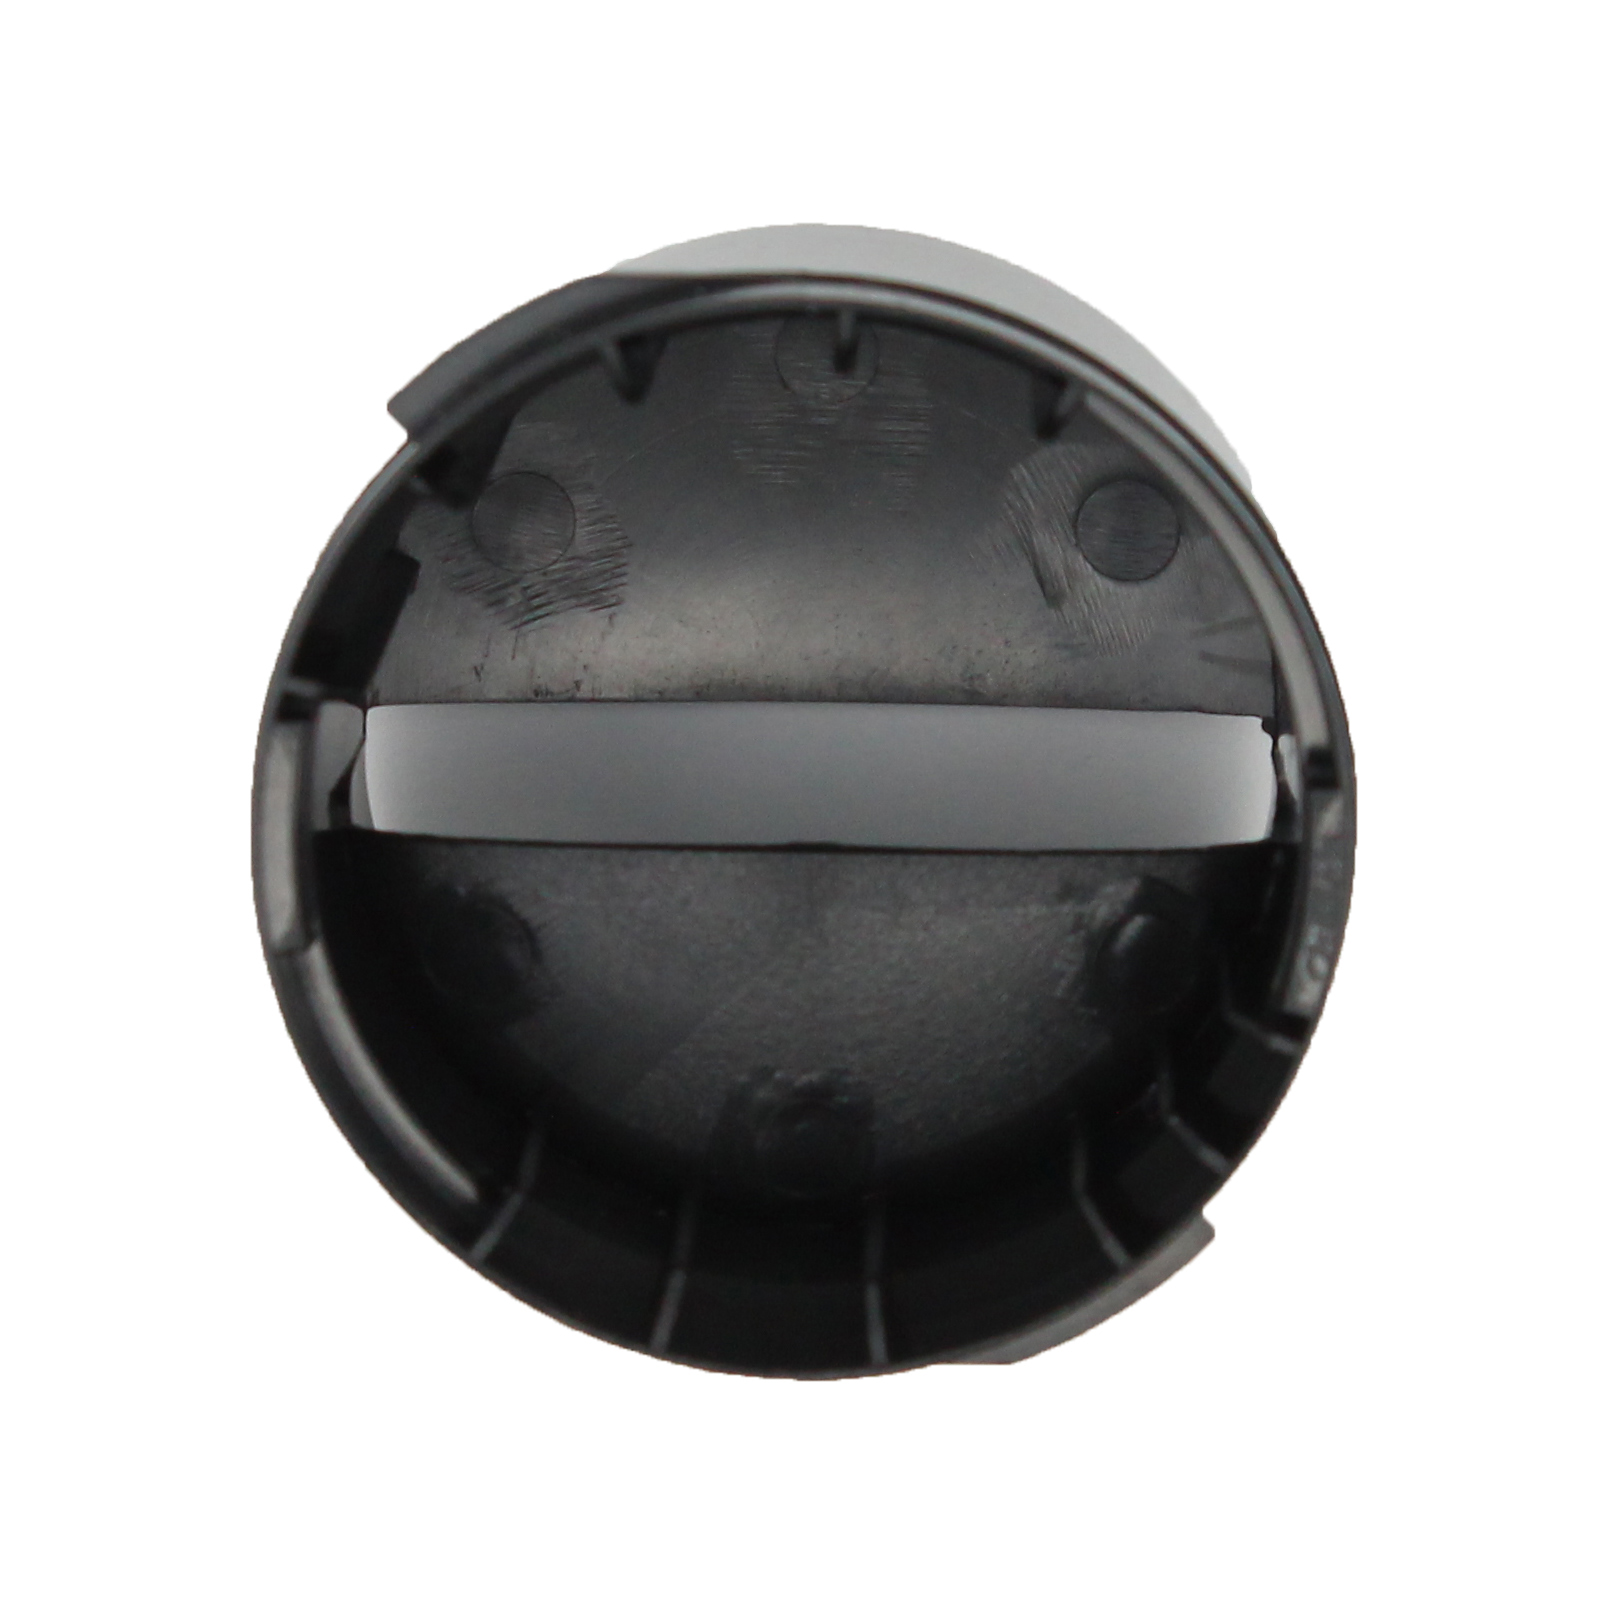 2260502B Refrigerator Water Filter Cap Replacement for Kenmore / Sears 10656246400 Refrigerator - Compatible with WP2260518B Black Water Filter Cap - UpStart Components Brand - image 2 of 4